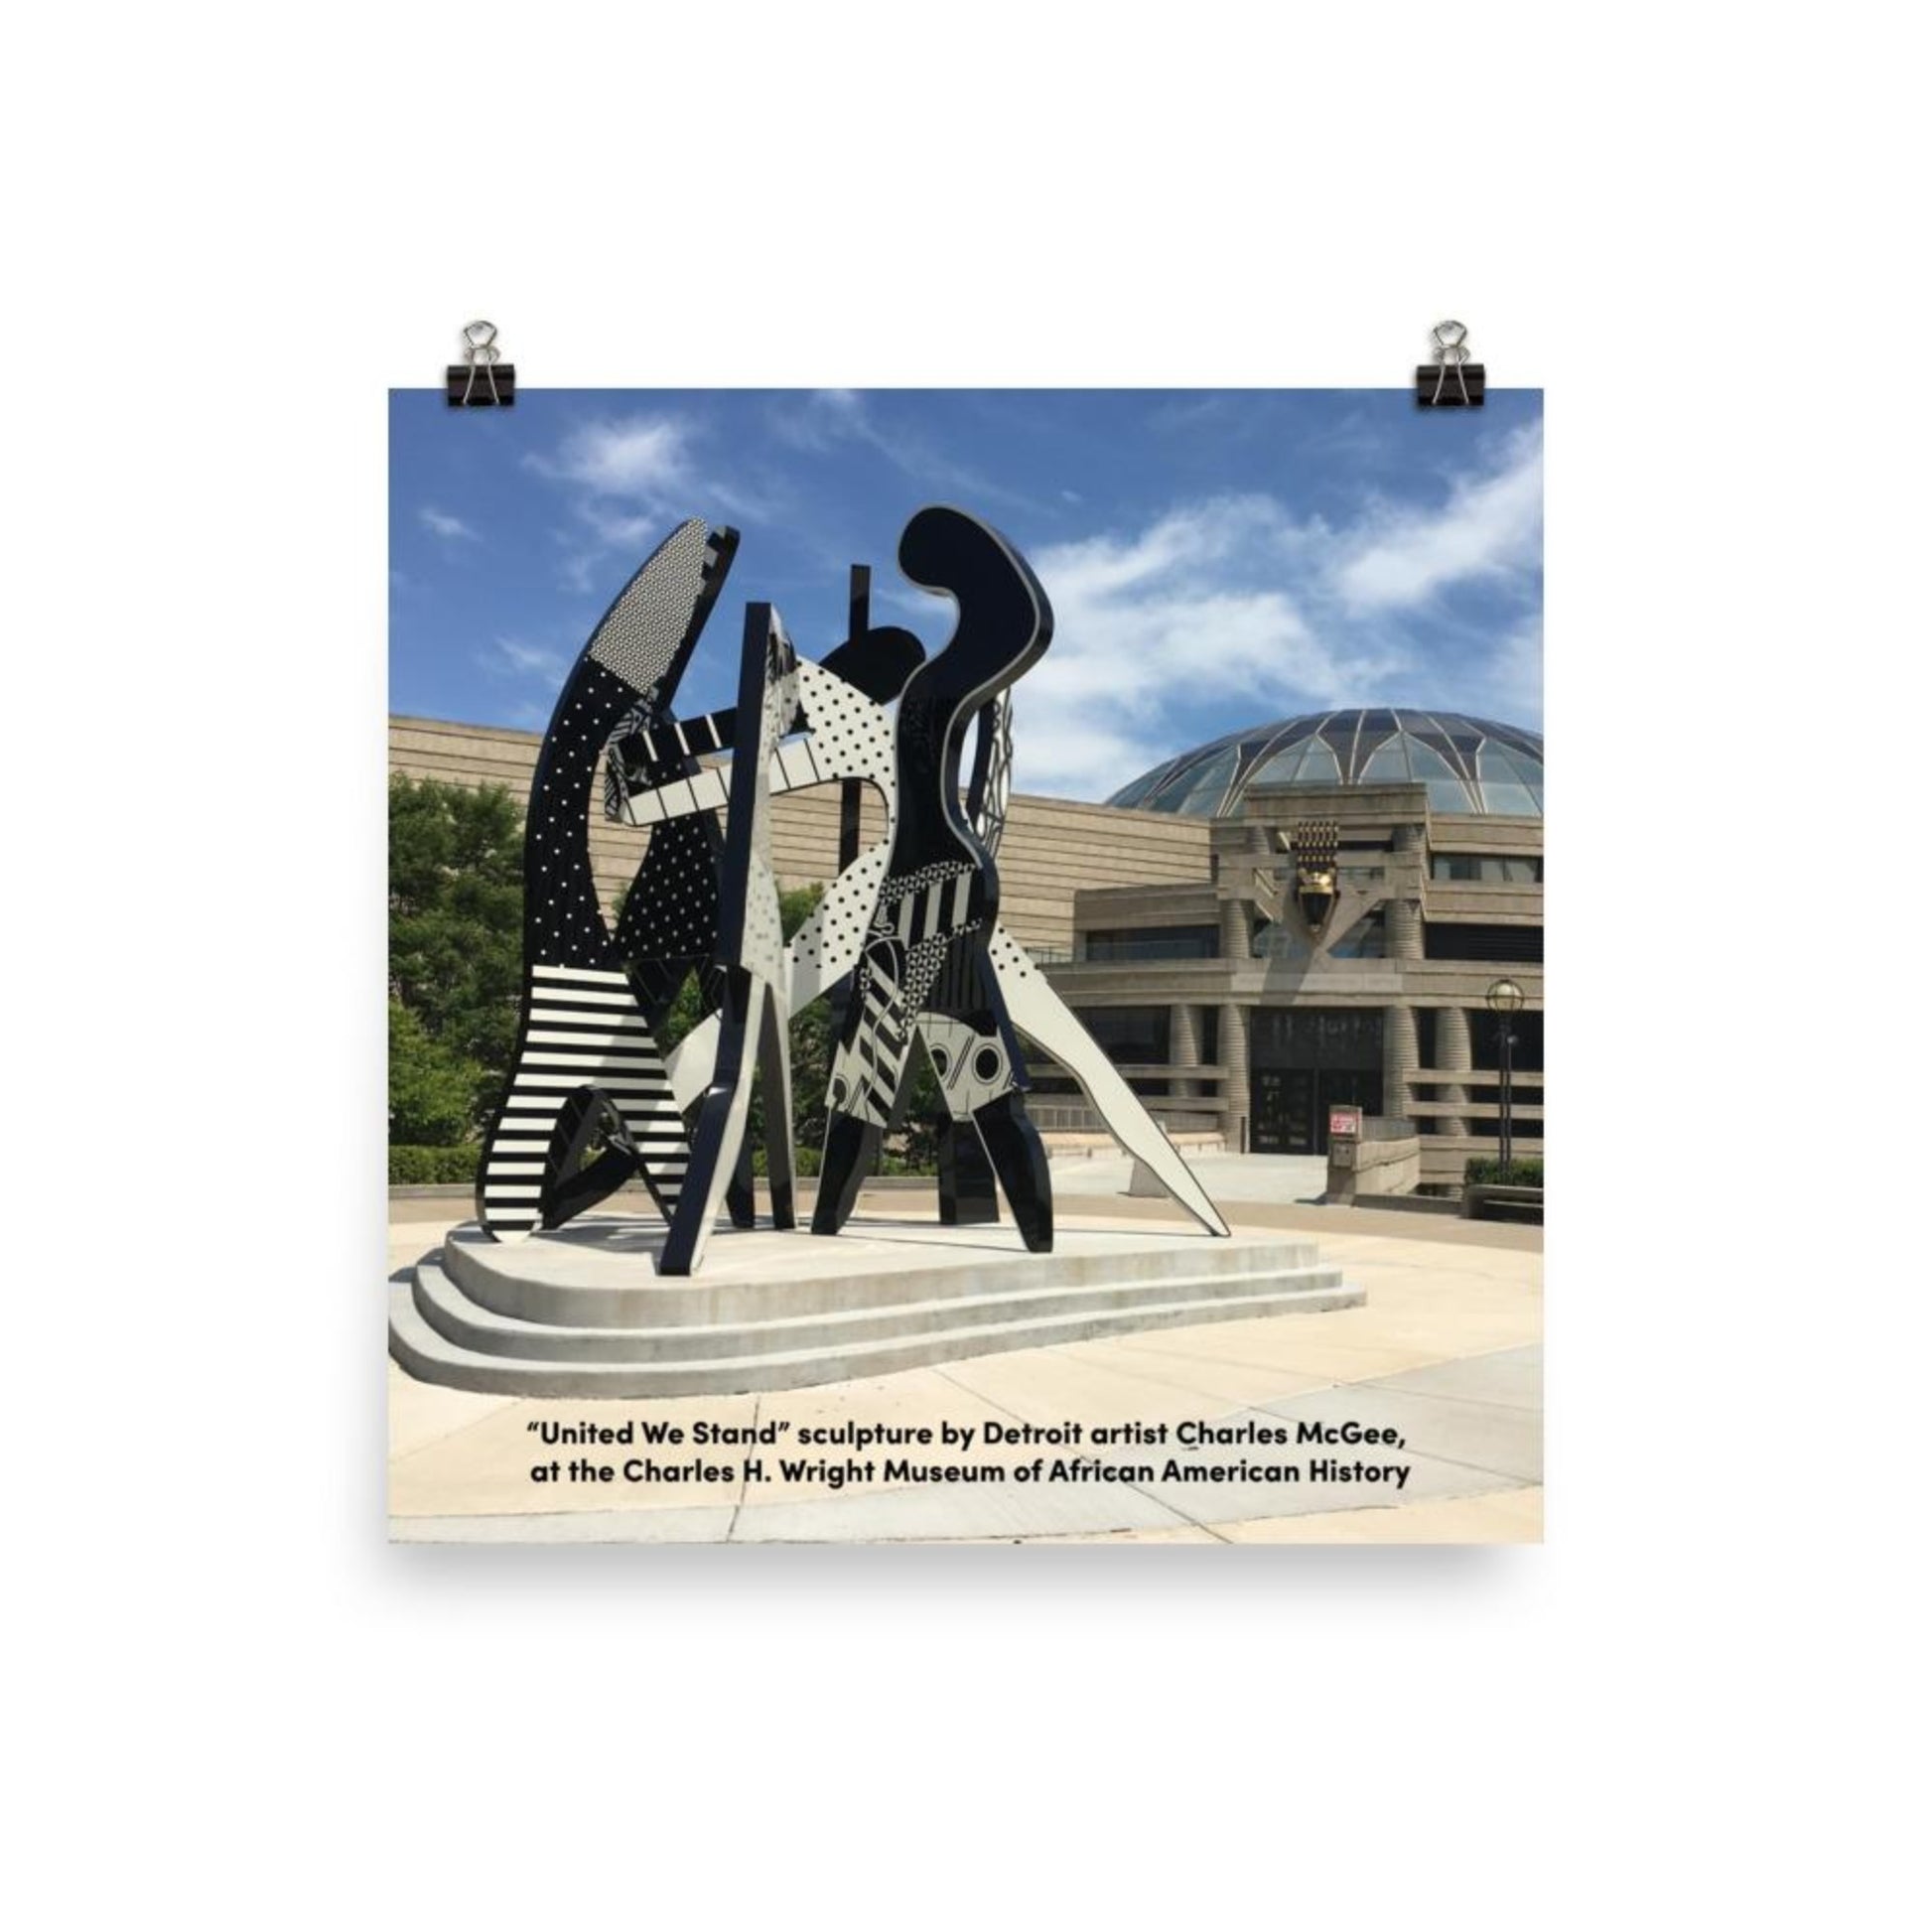 18 inch by 18 inch poster with United We Stand sculpture in front of Charles H. Wright Museum of African American History